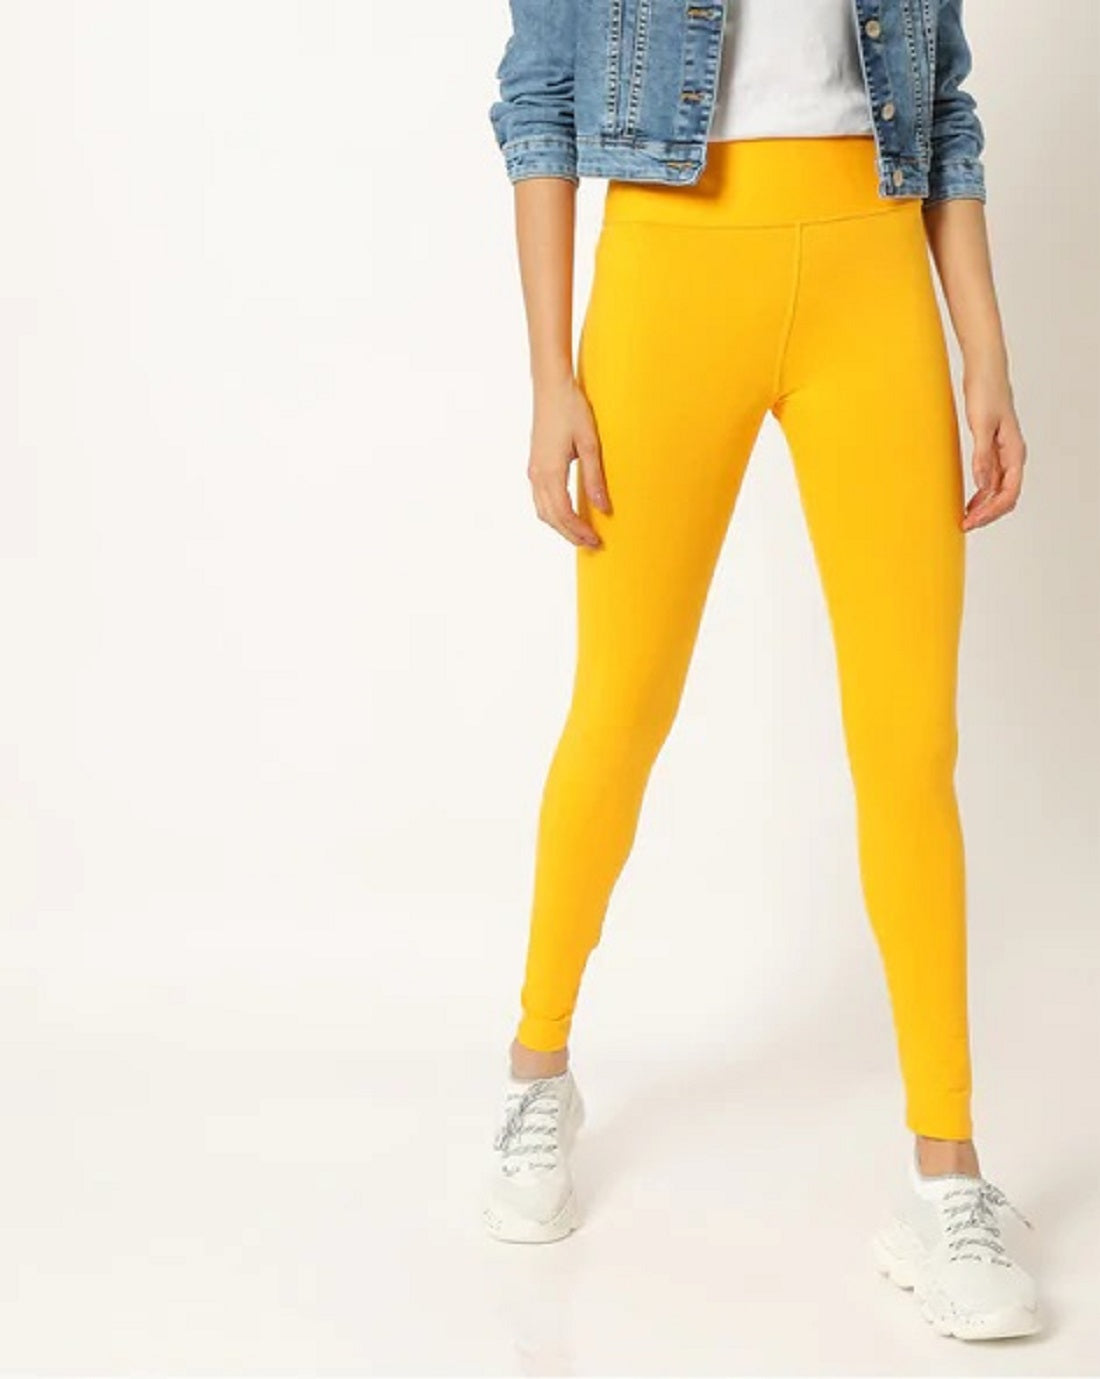 UCLA Gold - solid color Leggings by Make it Colorful